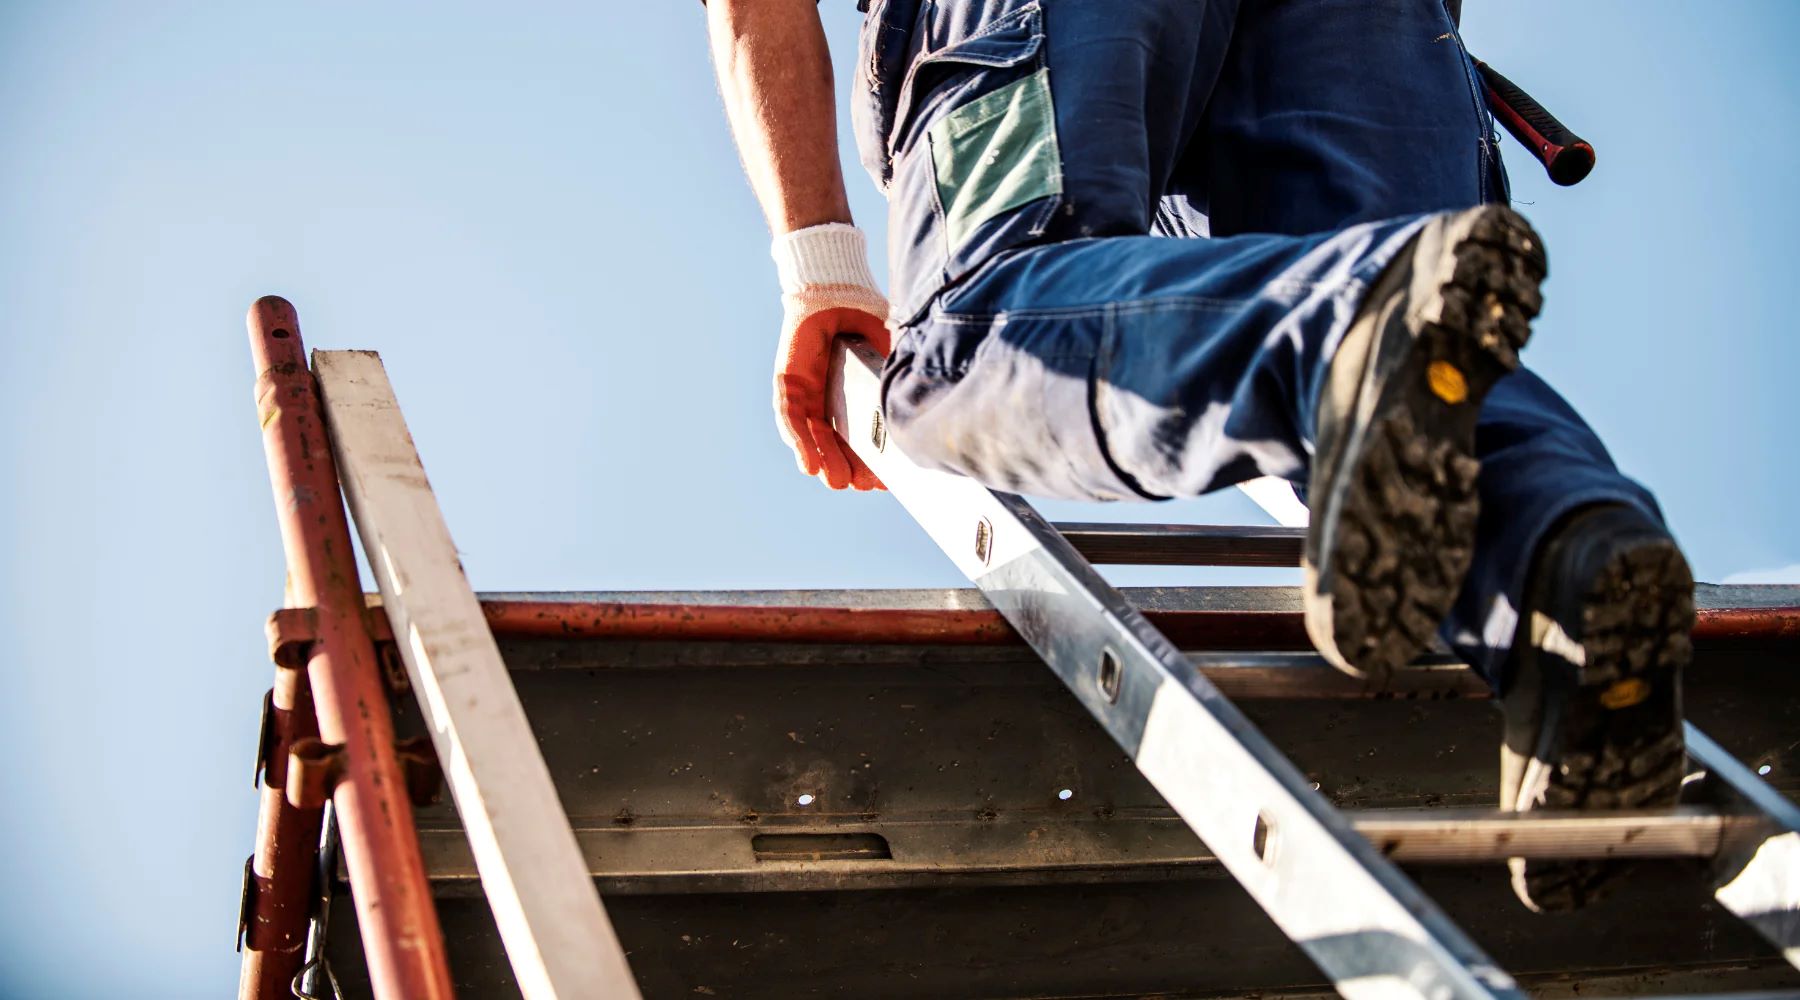 What Are The OSHA Safety Standards When Using A Ladder?